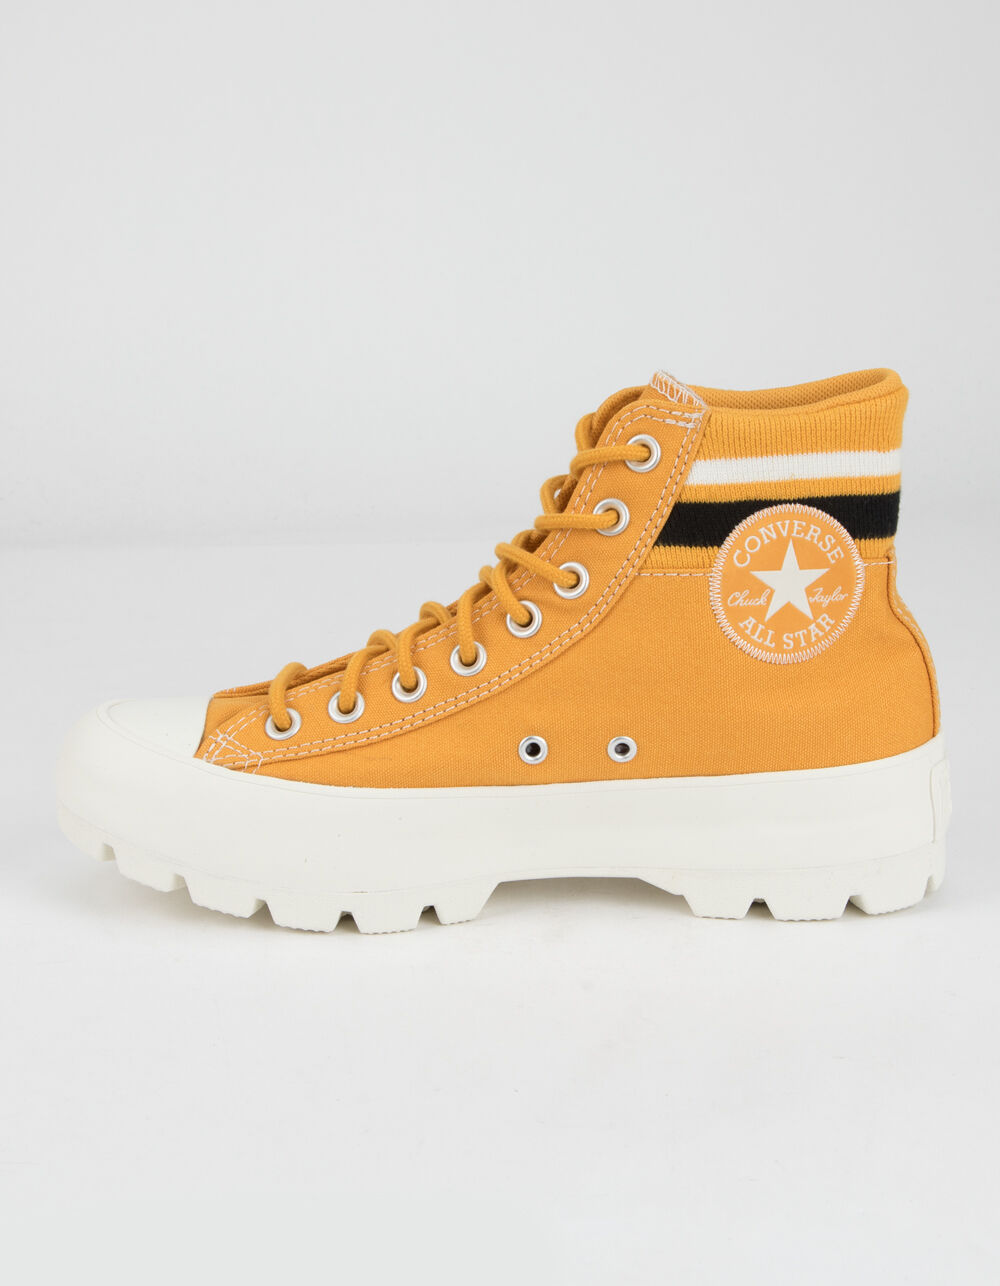 CONVERSE Lugged Varsity Chuck Taylor All Star Womens Yellow High Top ...